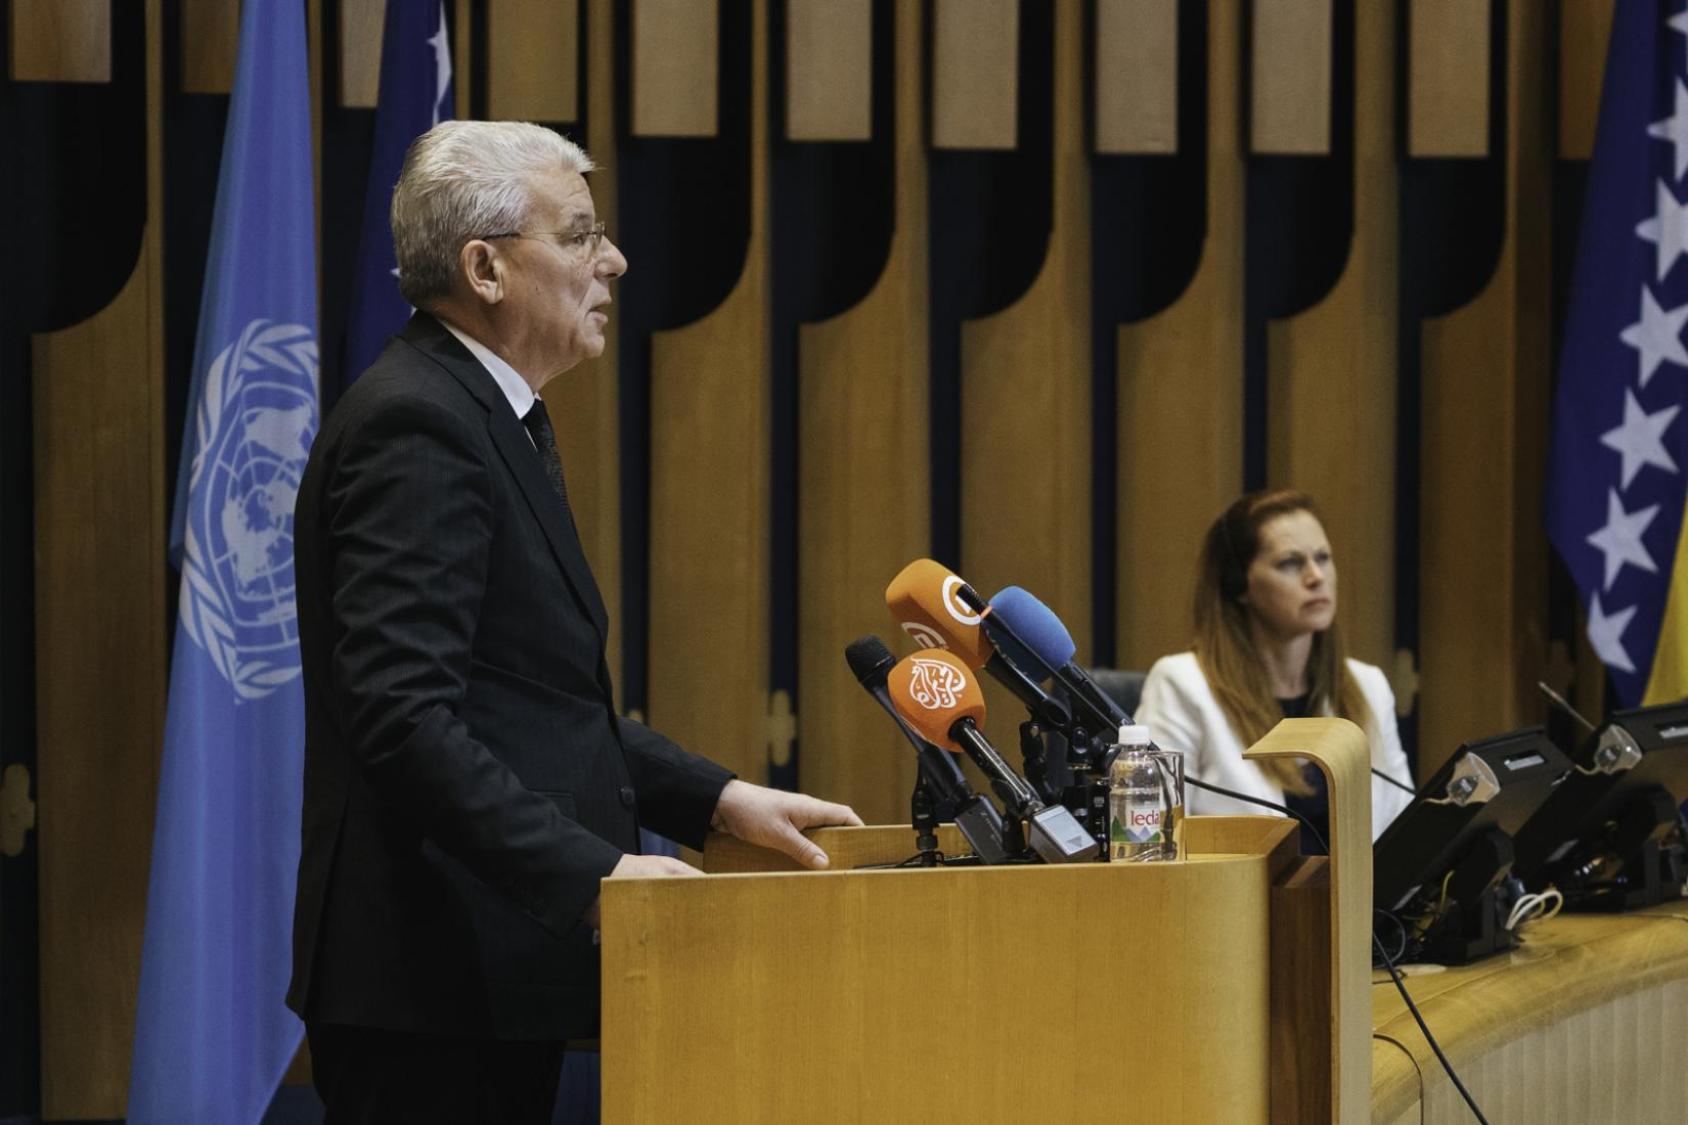 The Chairman of the Presidency of Bosnia and Herzegovina, HE Šefik Džaferović stands at the podium to deliver opening remarks at the 30th anniversary ceremony.